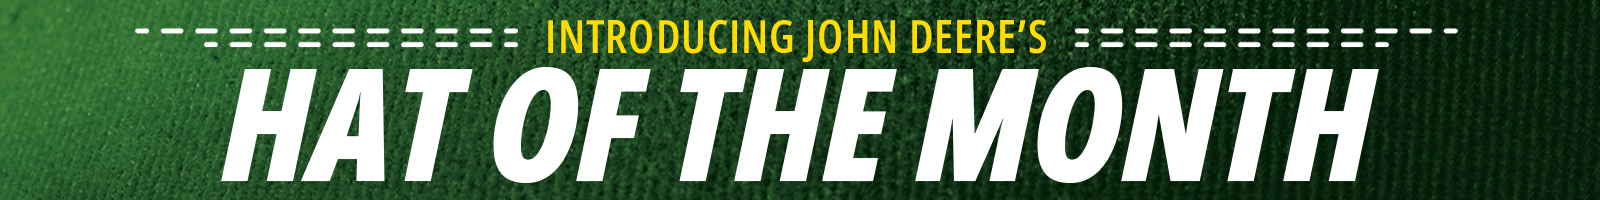 Introducing John Deere's Hat of the Month